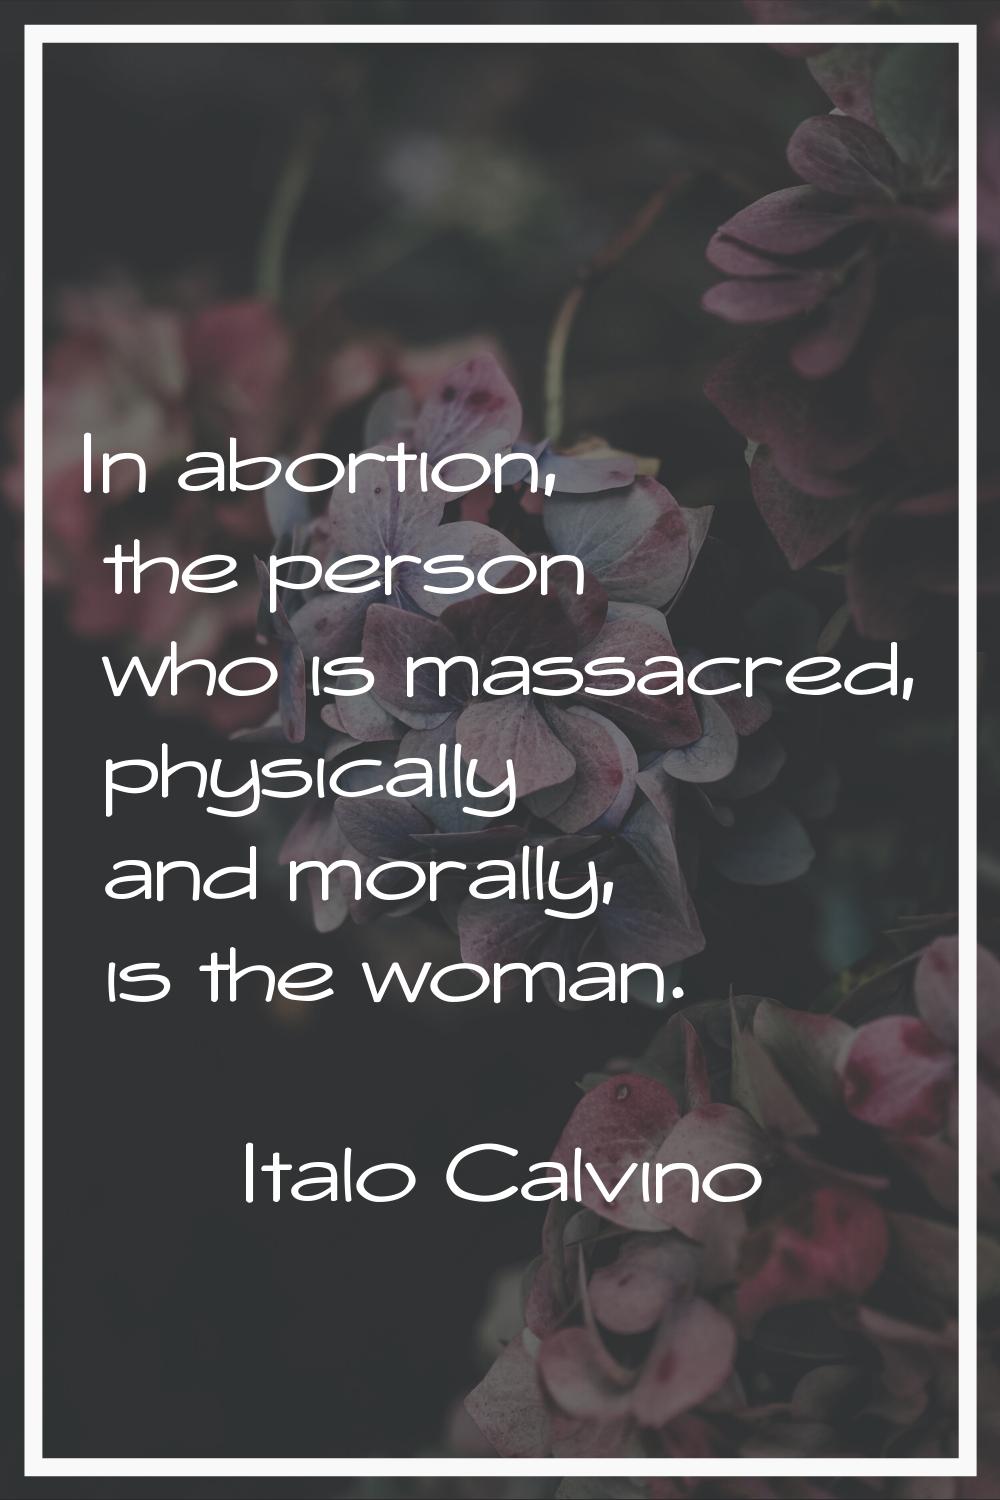 In abortion, the person who is massacred, physically and morally, is the woman.